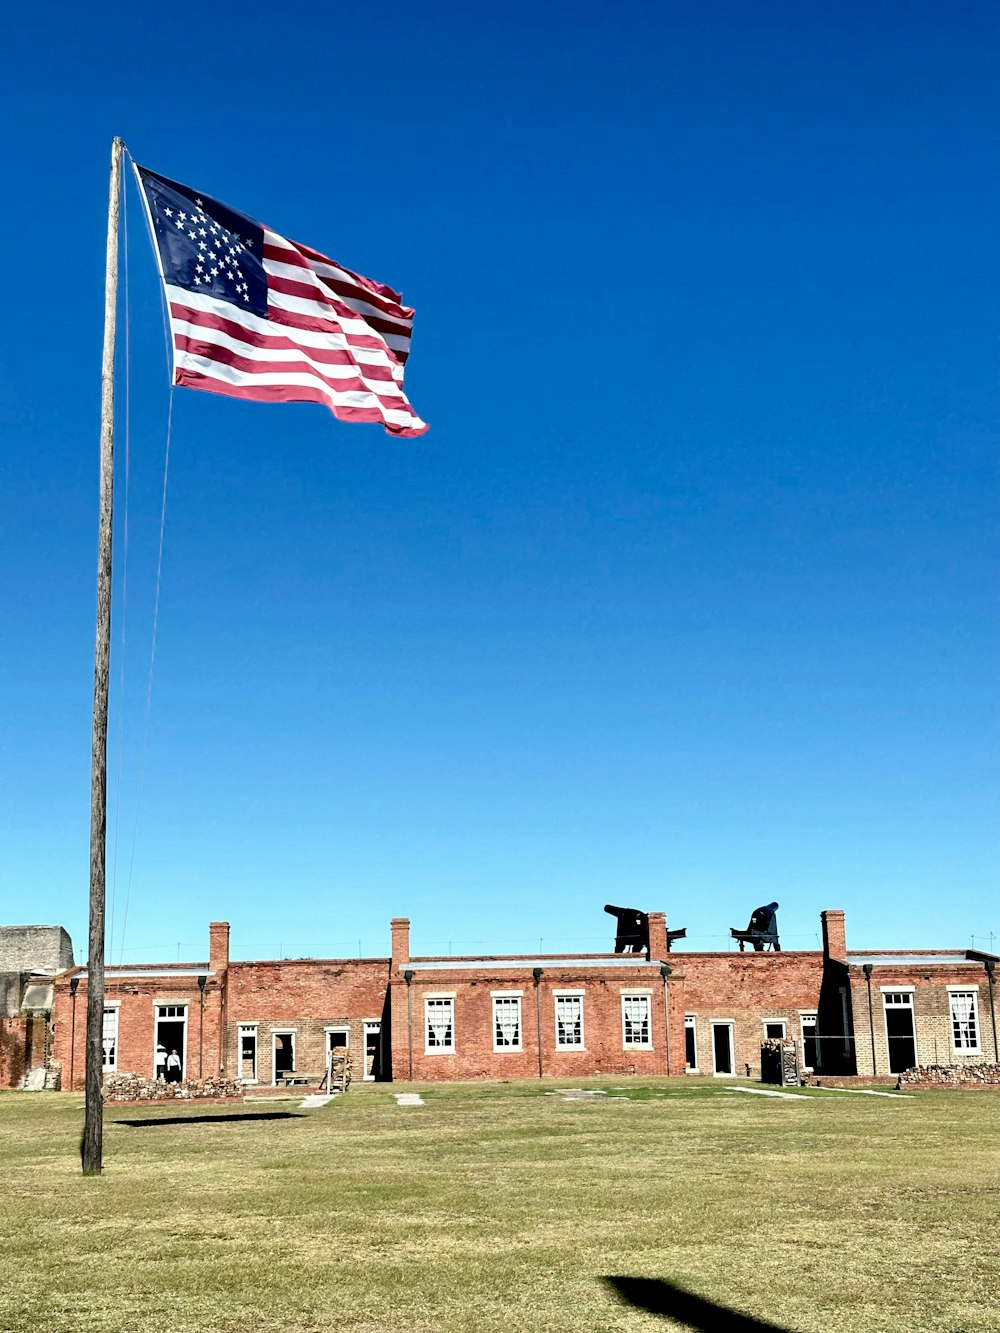 an american flag flying in front of a brick building